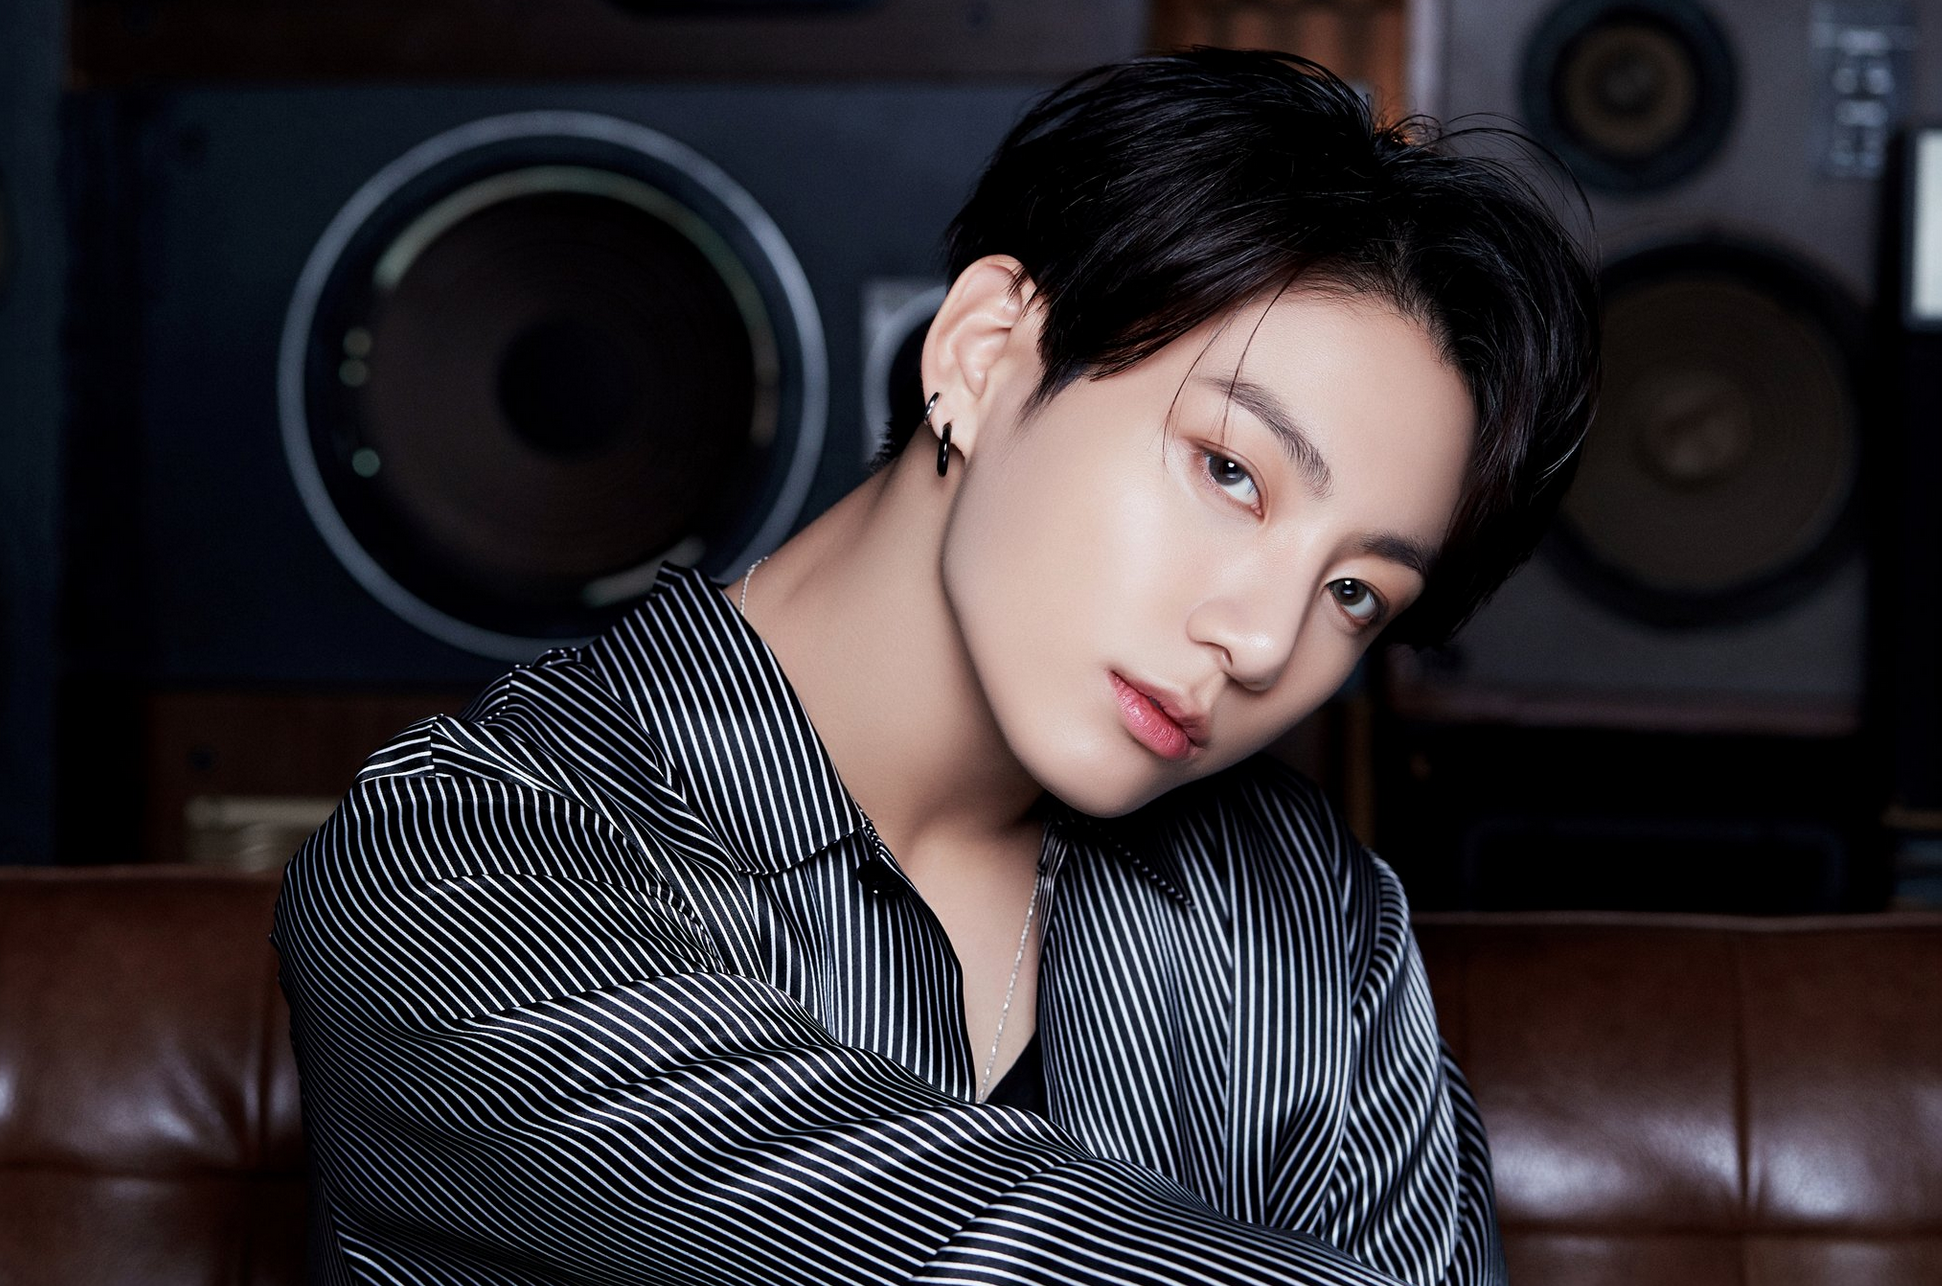 King JK: Fans euphoric as Jungkook's solo album 'GOLDEN' surpasses 1  Billion Spotify streams prior to its official release